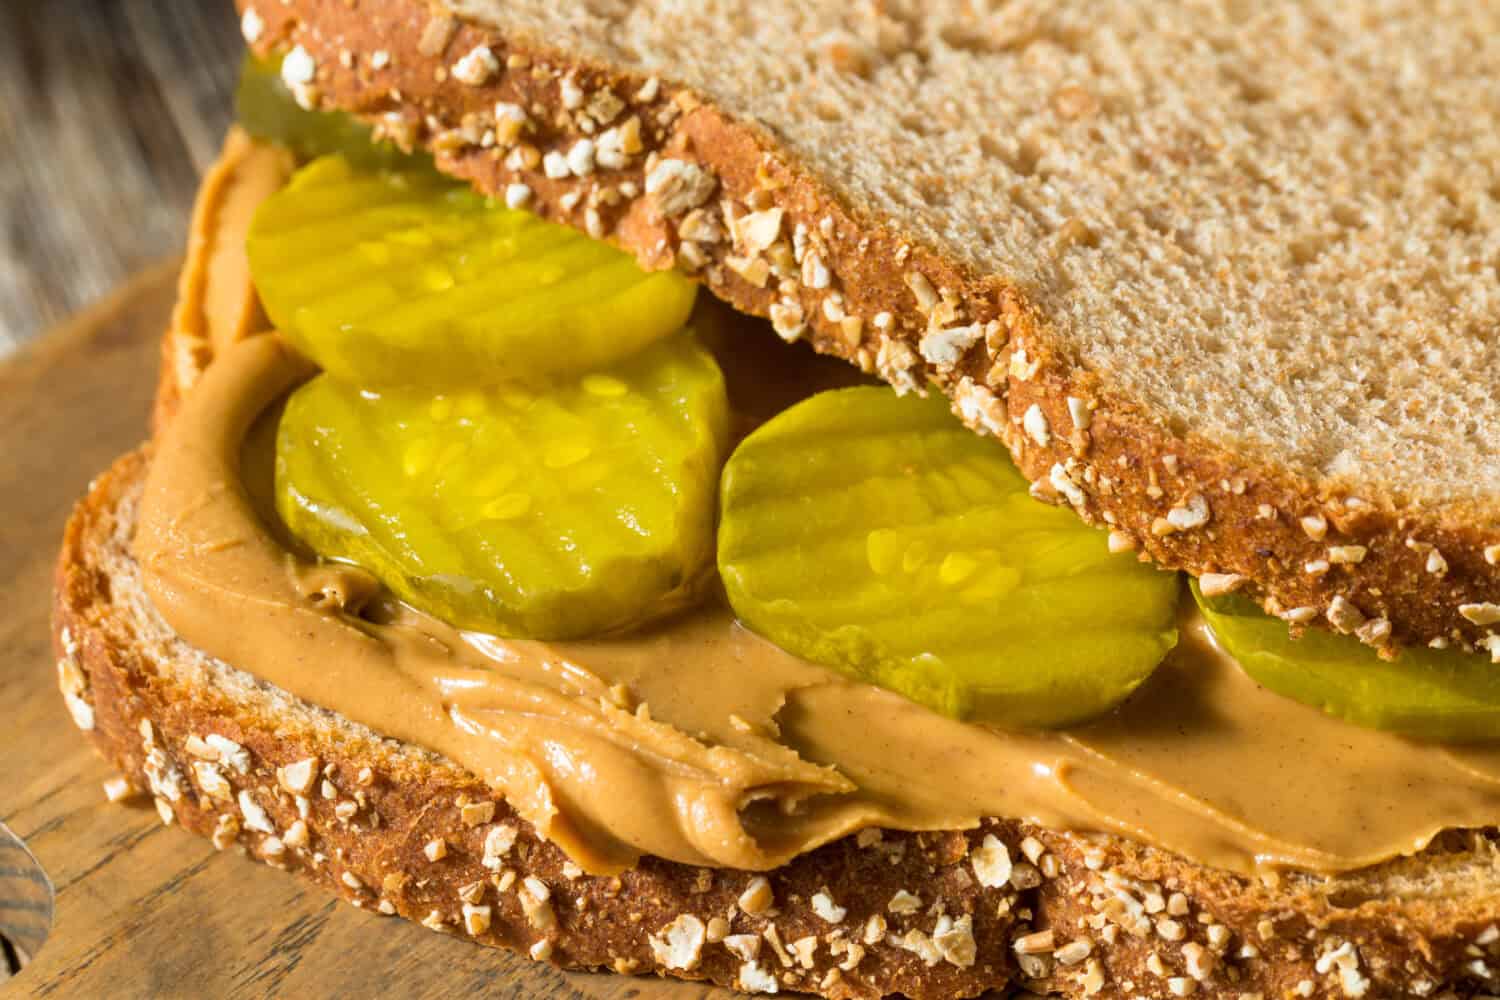 Homemade Peanut Butter and Pickle Sandwich with Chips